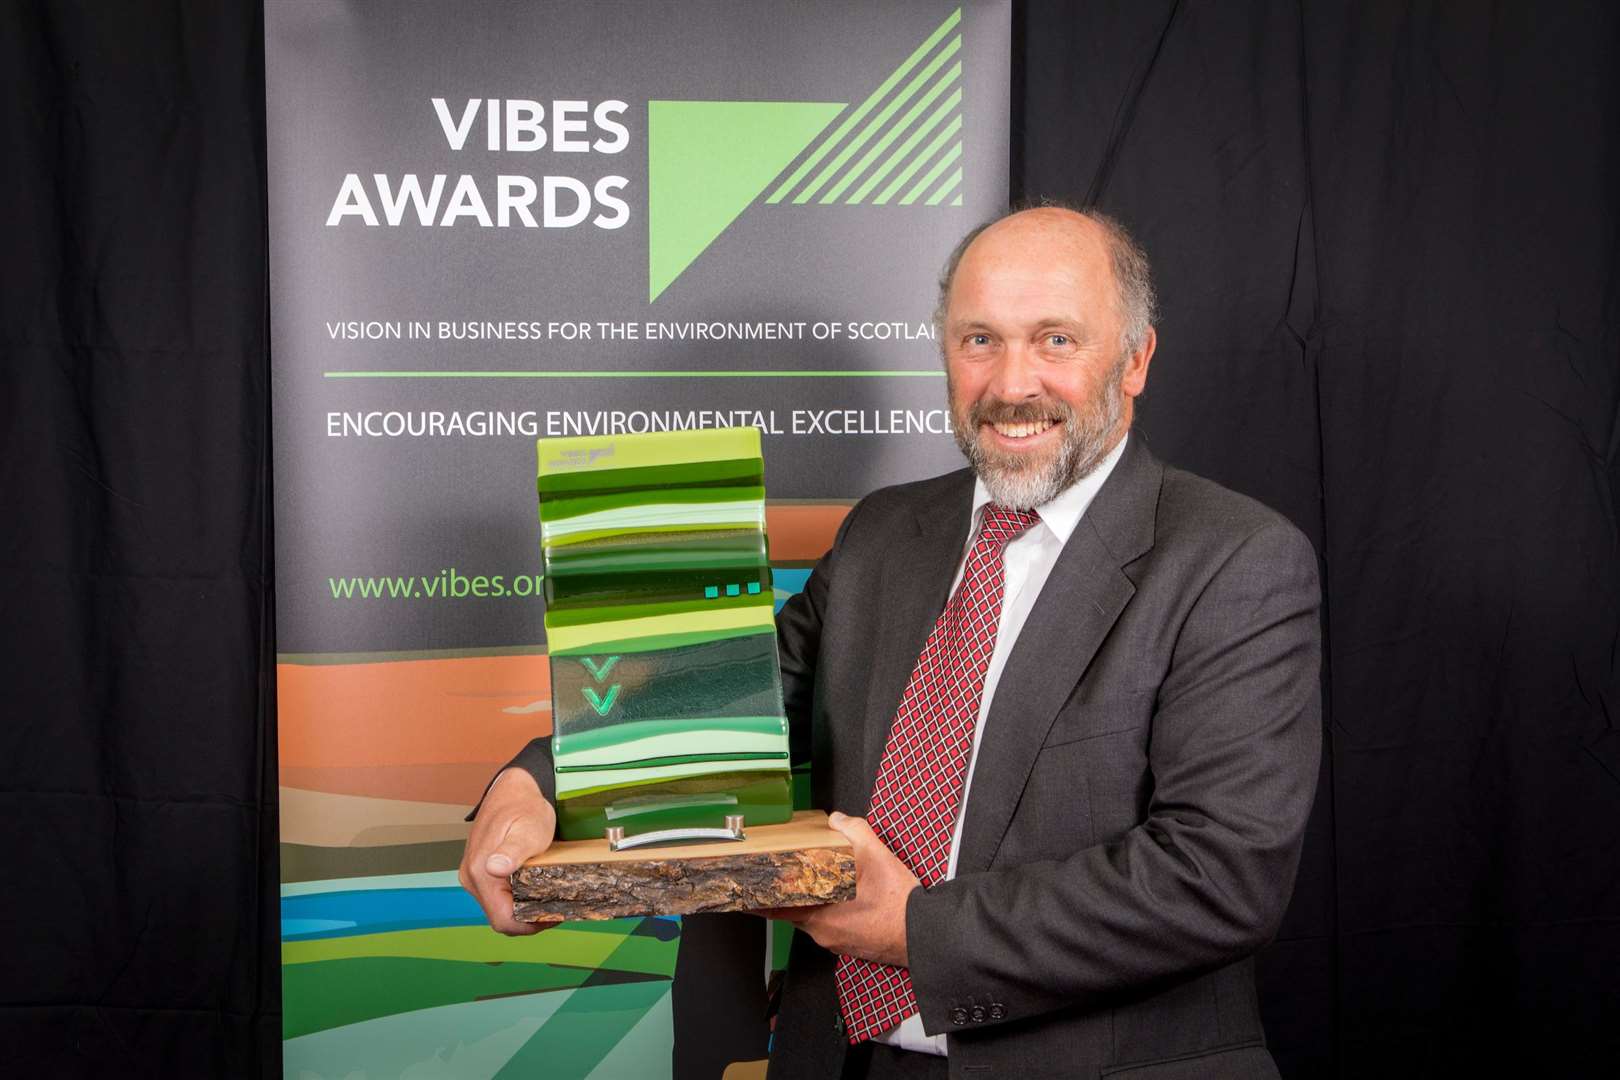 The 2022 VIBES Awards are looking for innovative businesses to share their success stories.